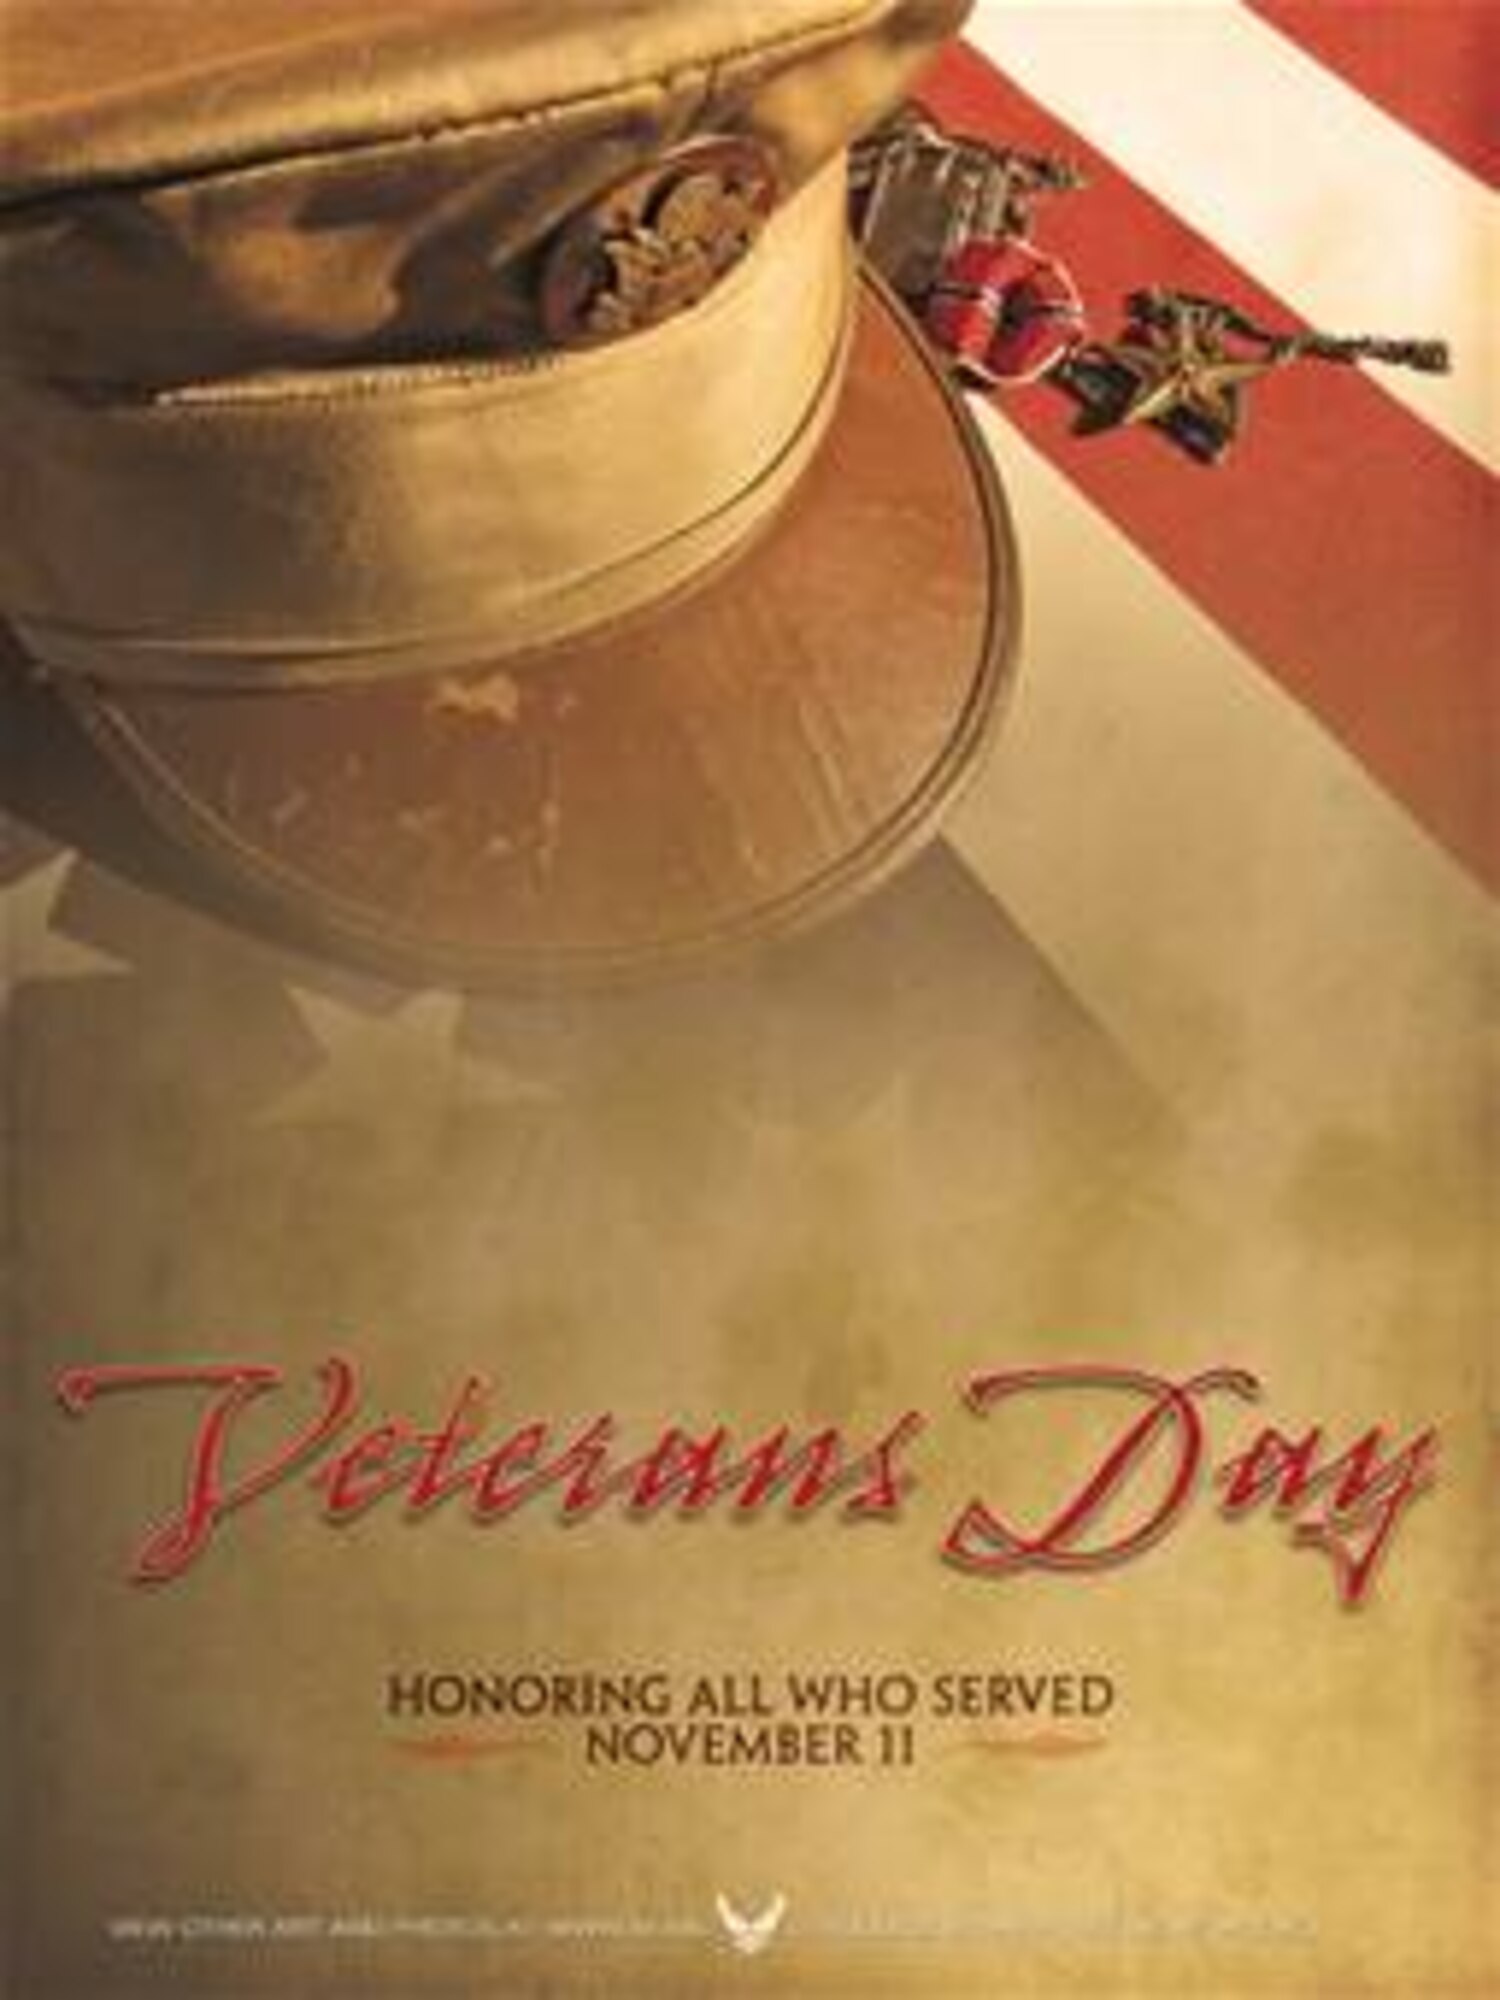 Veterans Day Poster. This poster is 7.5x10 inches @ 300 ppi and was created by j. Luke Borland of the Air Force News Agency. Poster is 6.5x10 @ 300 ppi and is available up to 18x24 @ 200 ppi. Air Force Link does not provide printed posters but a PDF version for printing is available. Requests can be made to afgraphics@dma.mil.  Please specify the title and number.